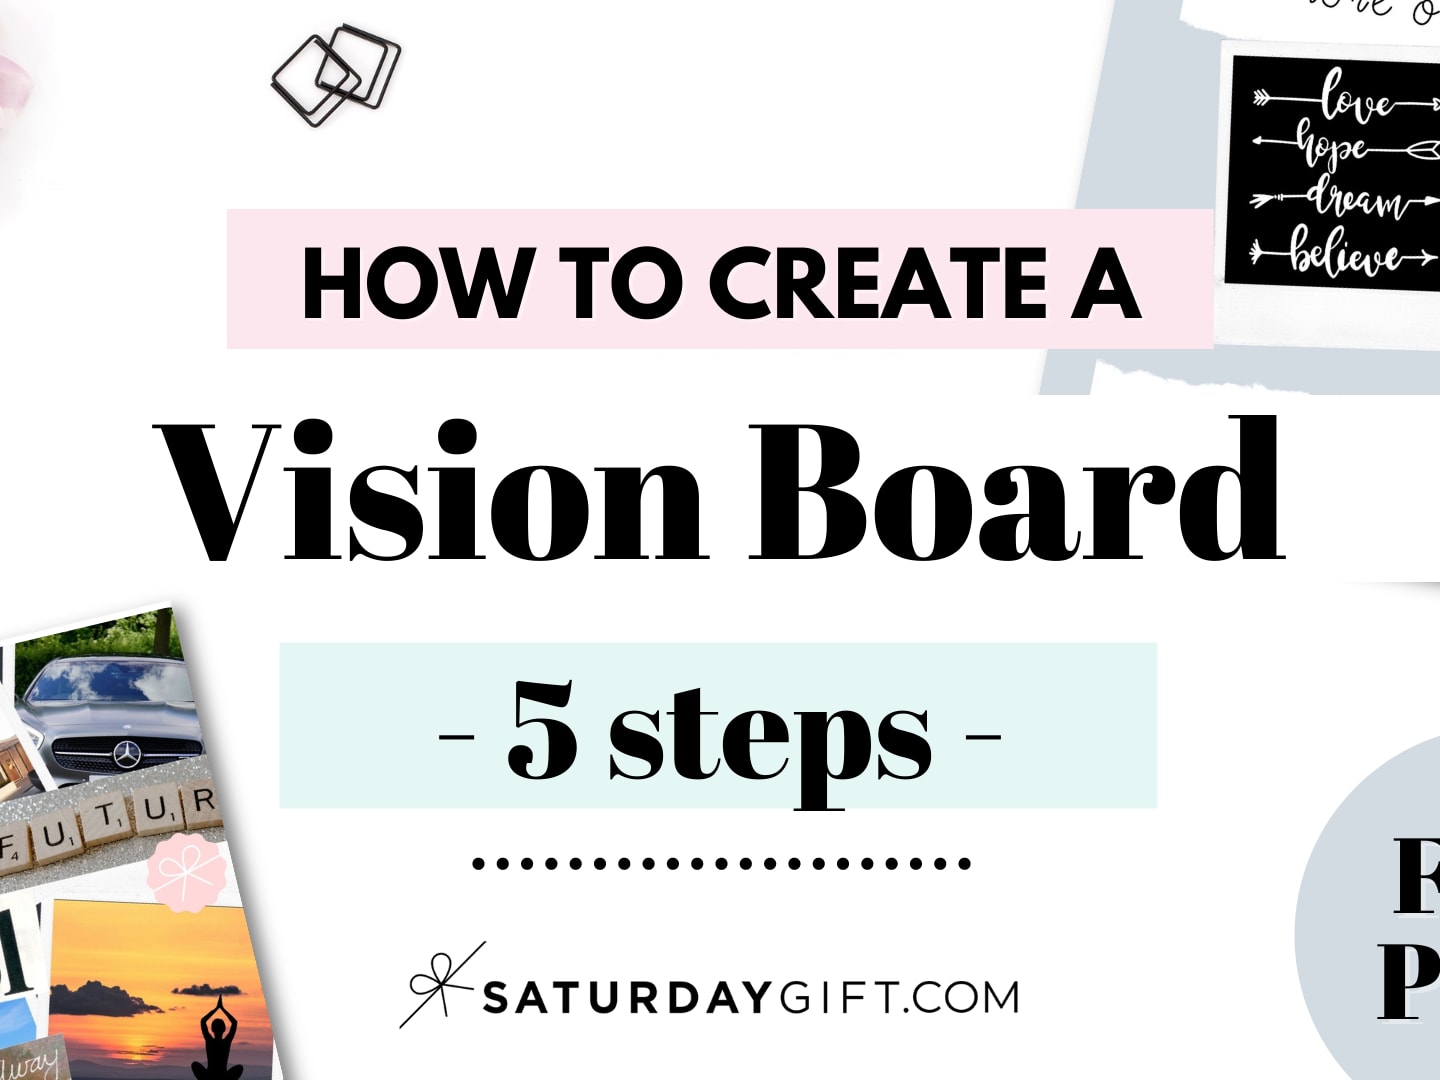 Vision Board Ideas: How to Create One and Keep Motivated